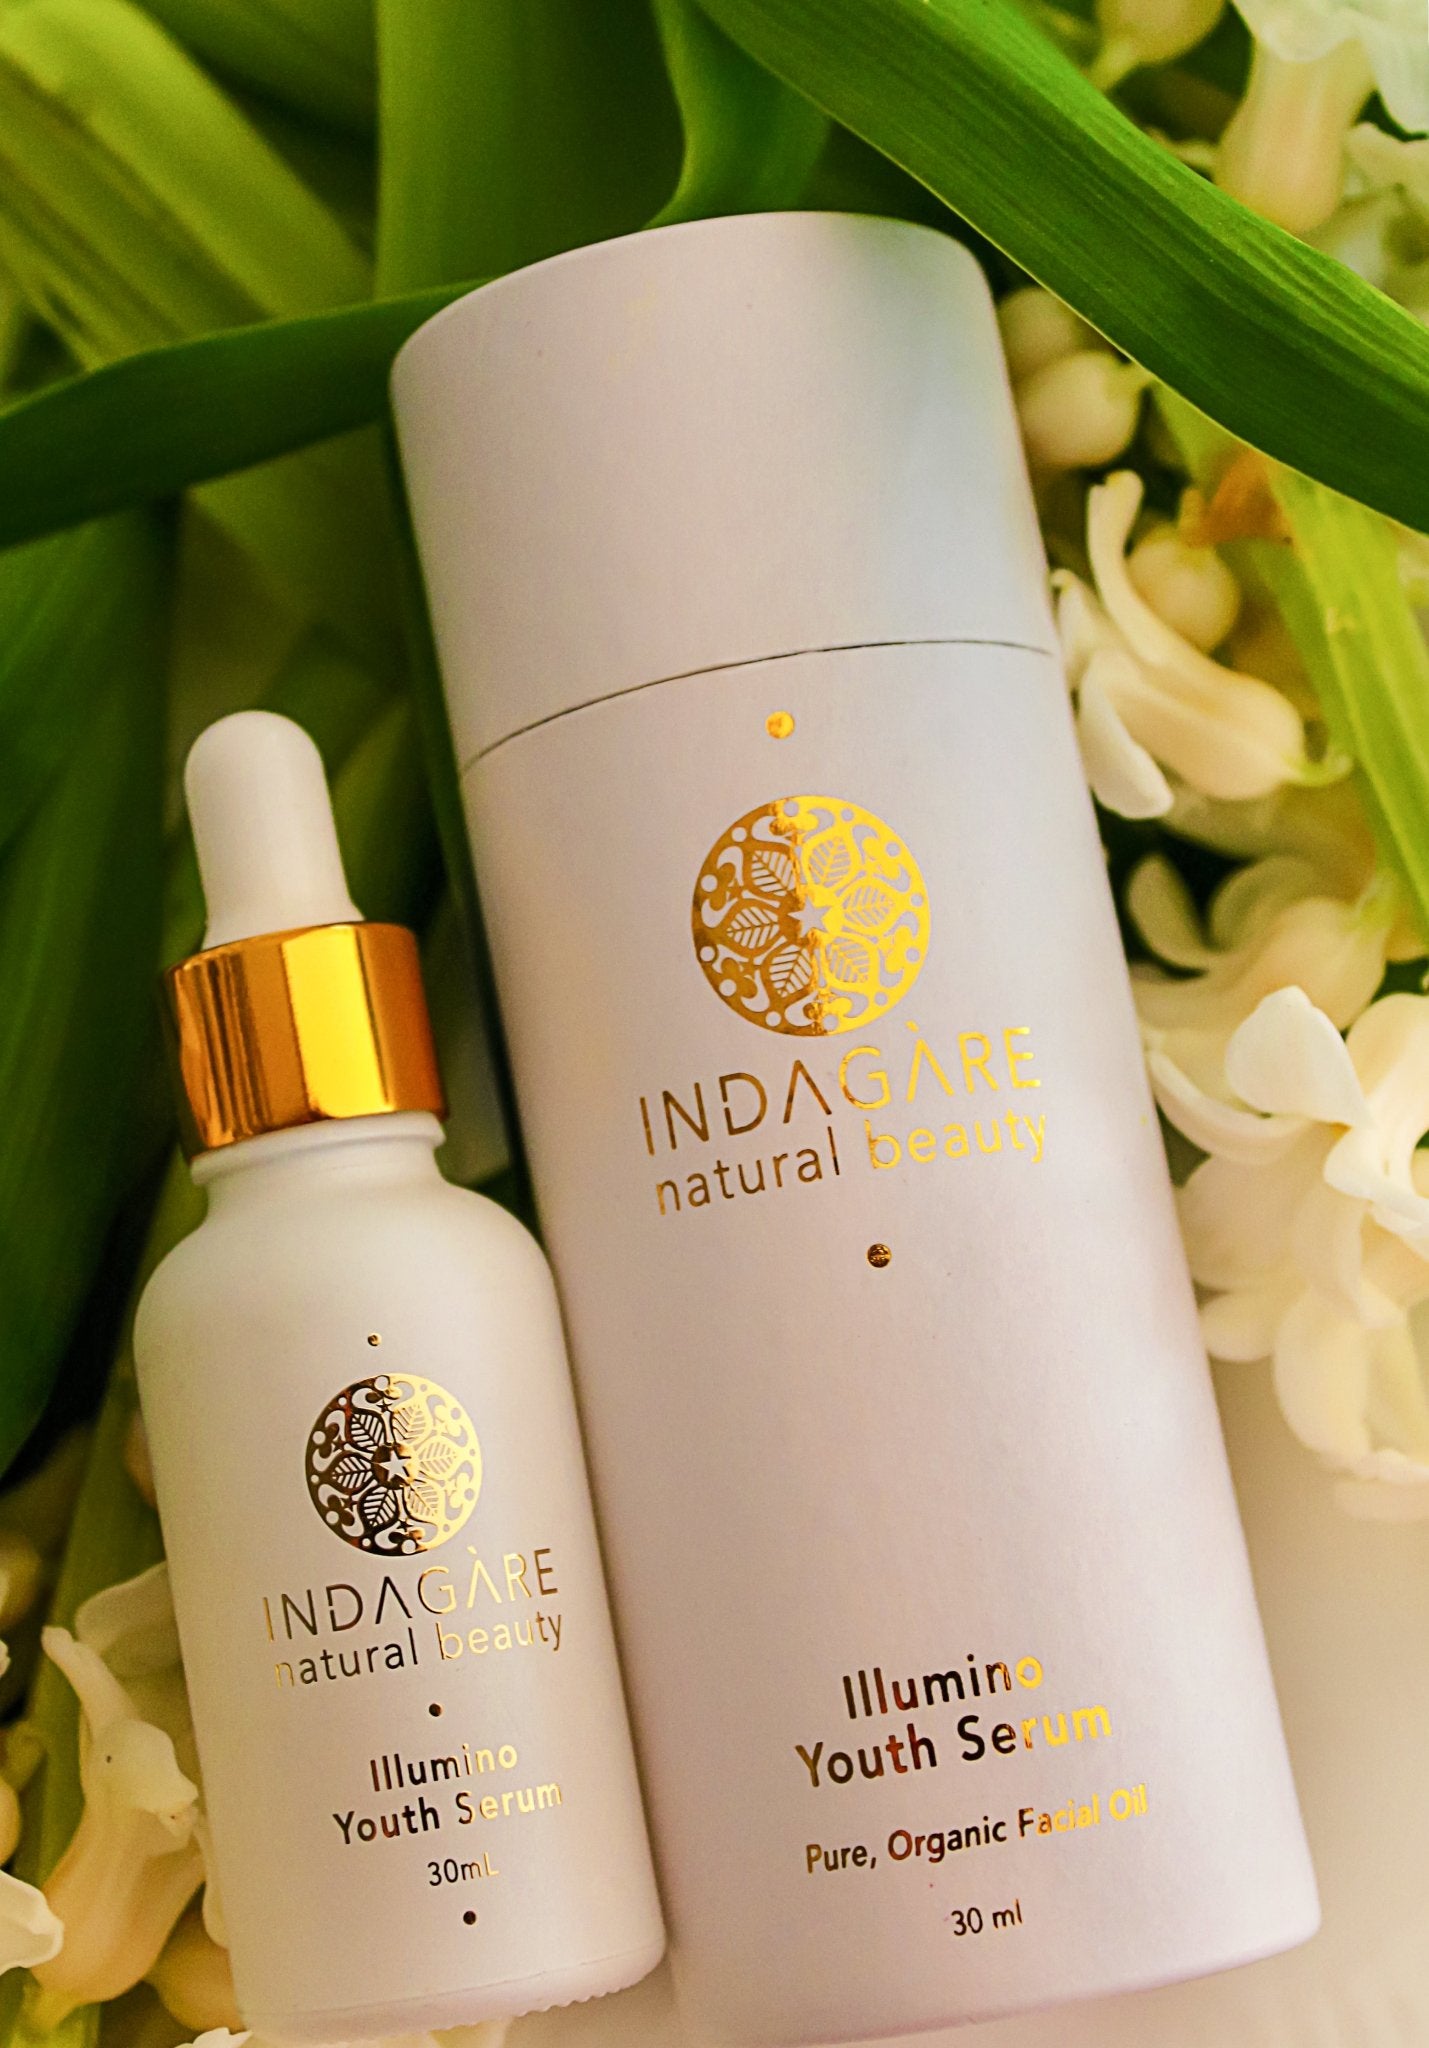 Ultra-lightweight Illumino Youth Serum  lands in time for the Aussie summer - Indagare Natural Beauty